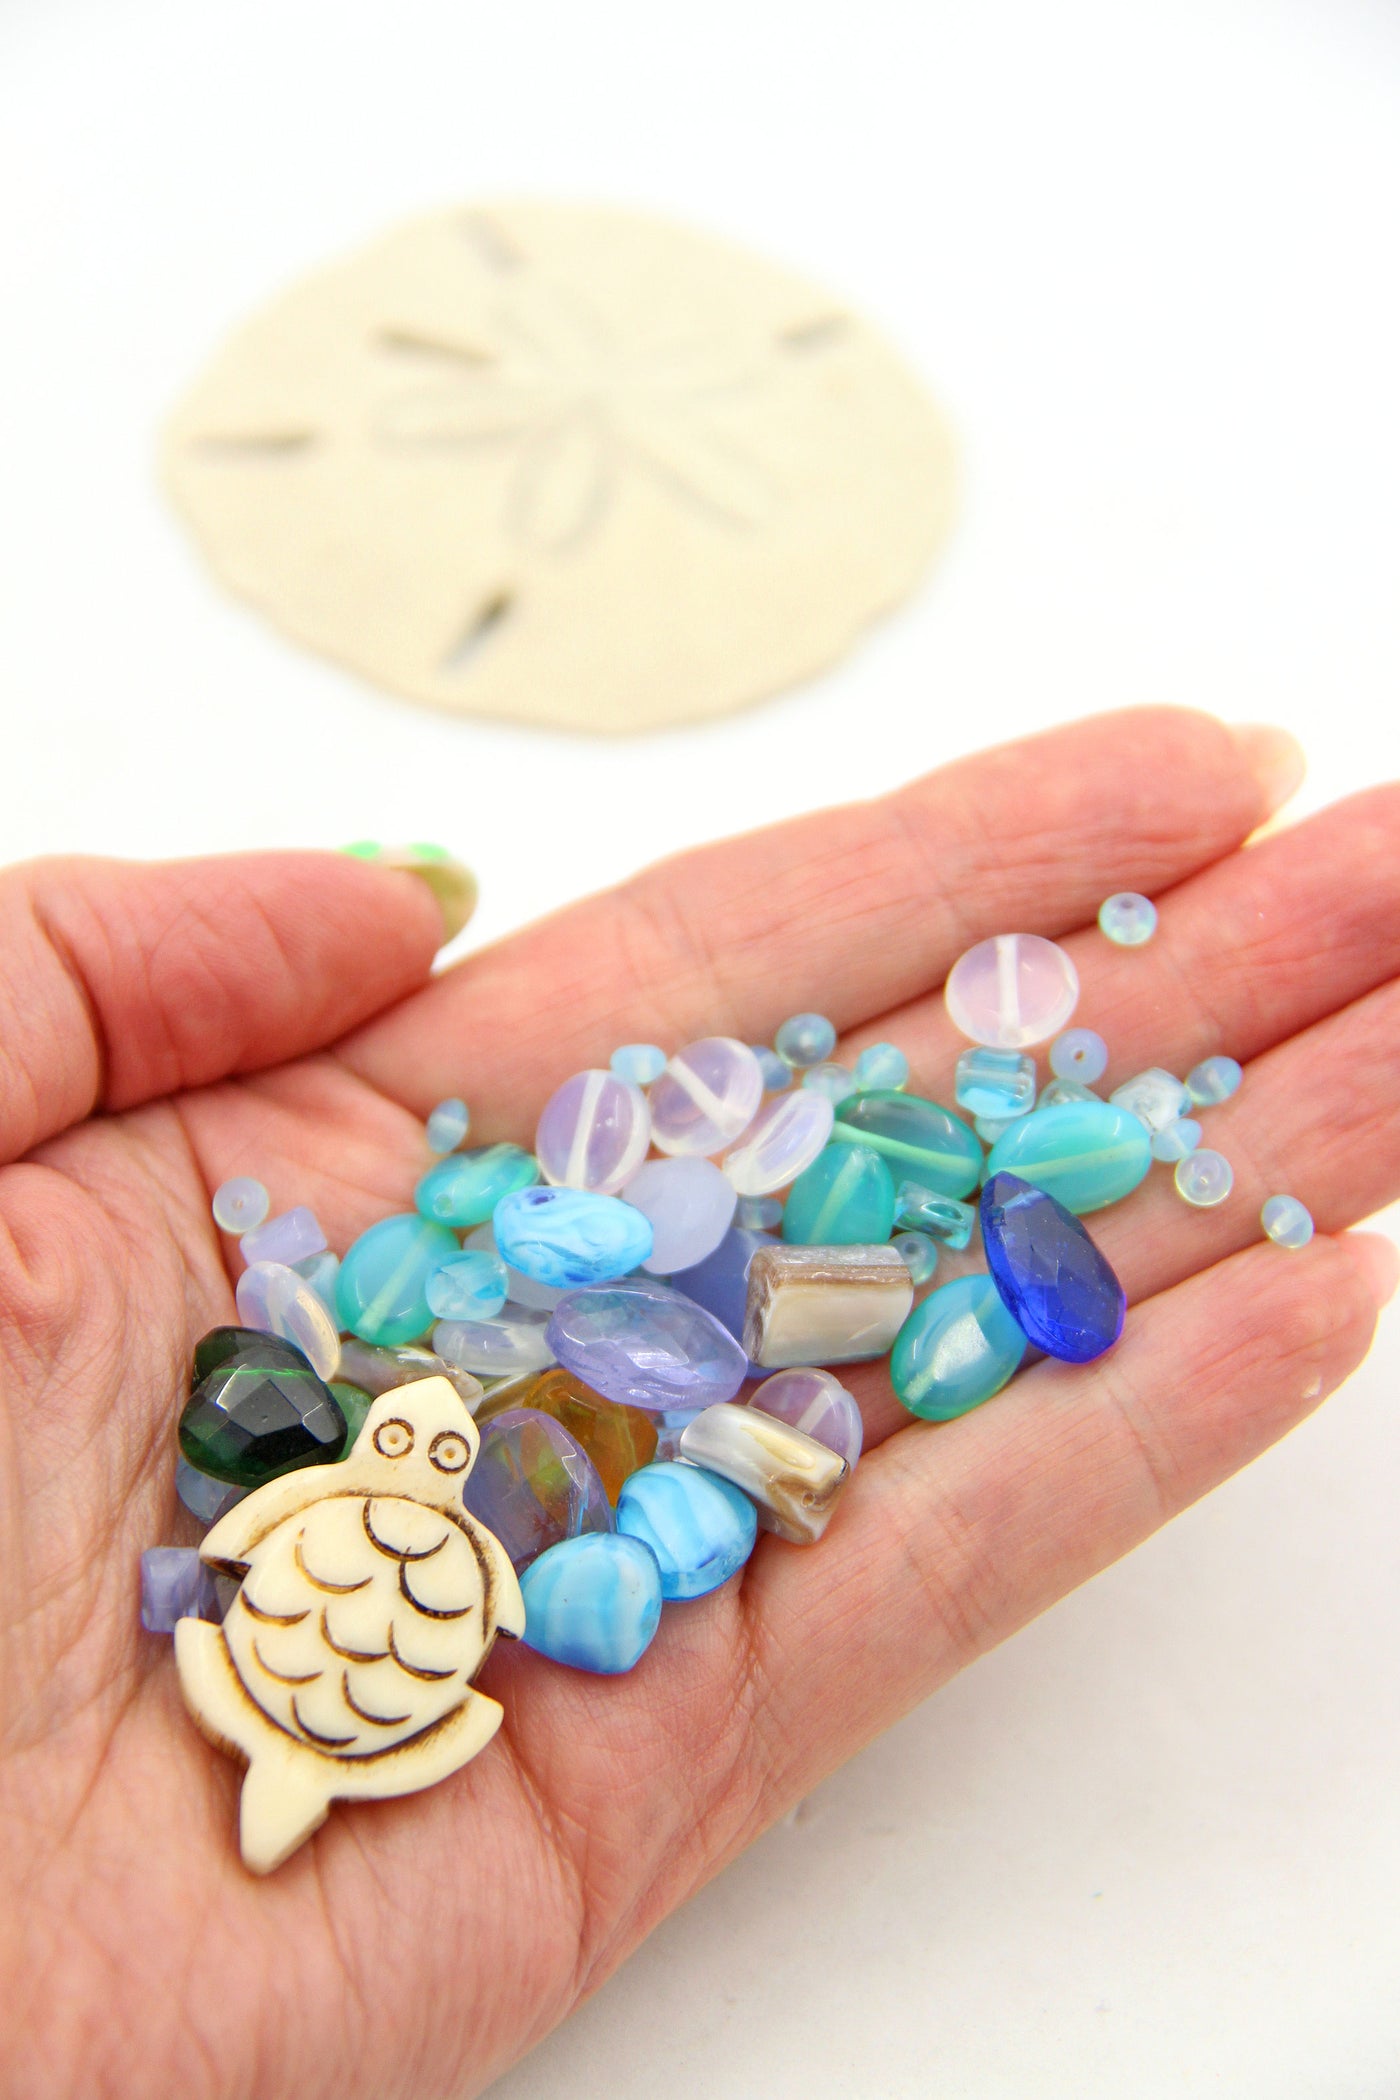 Surfside Glass Bead Grab Bag, Faceted Glass, Opalite, Bead Soup, 50+ Beads, Turtle Charm